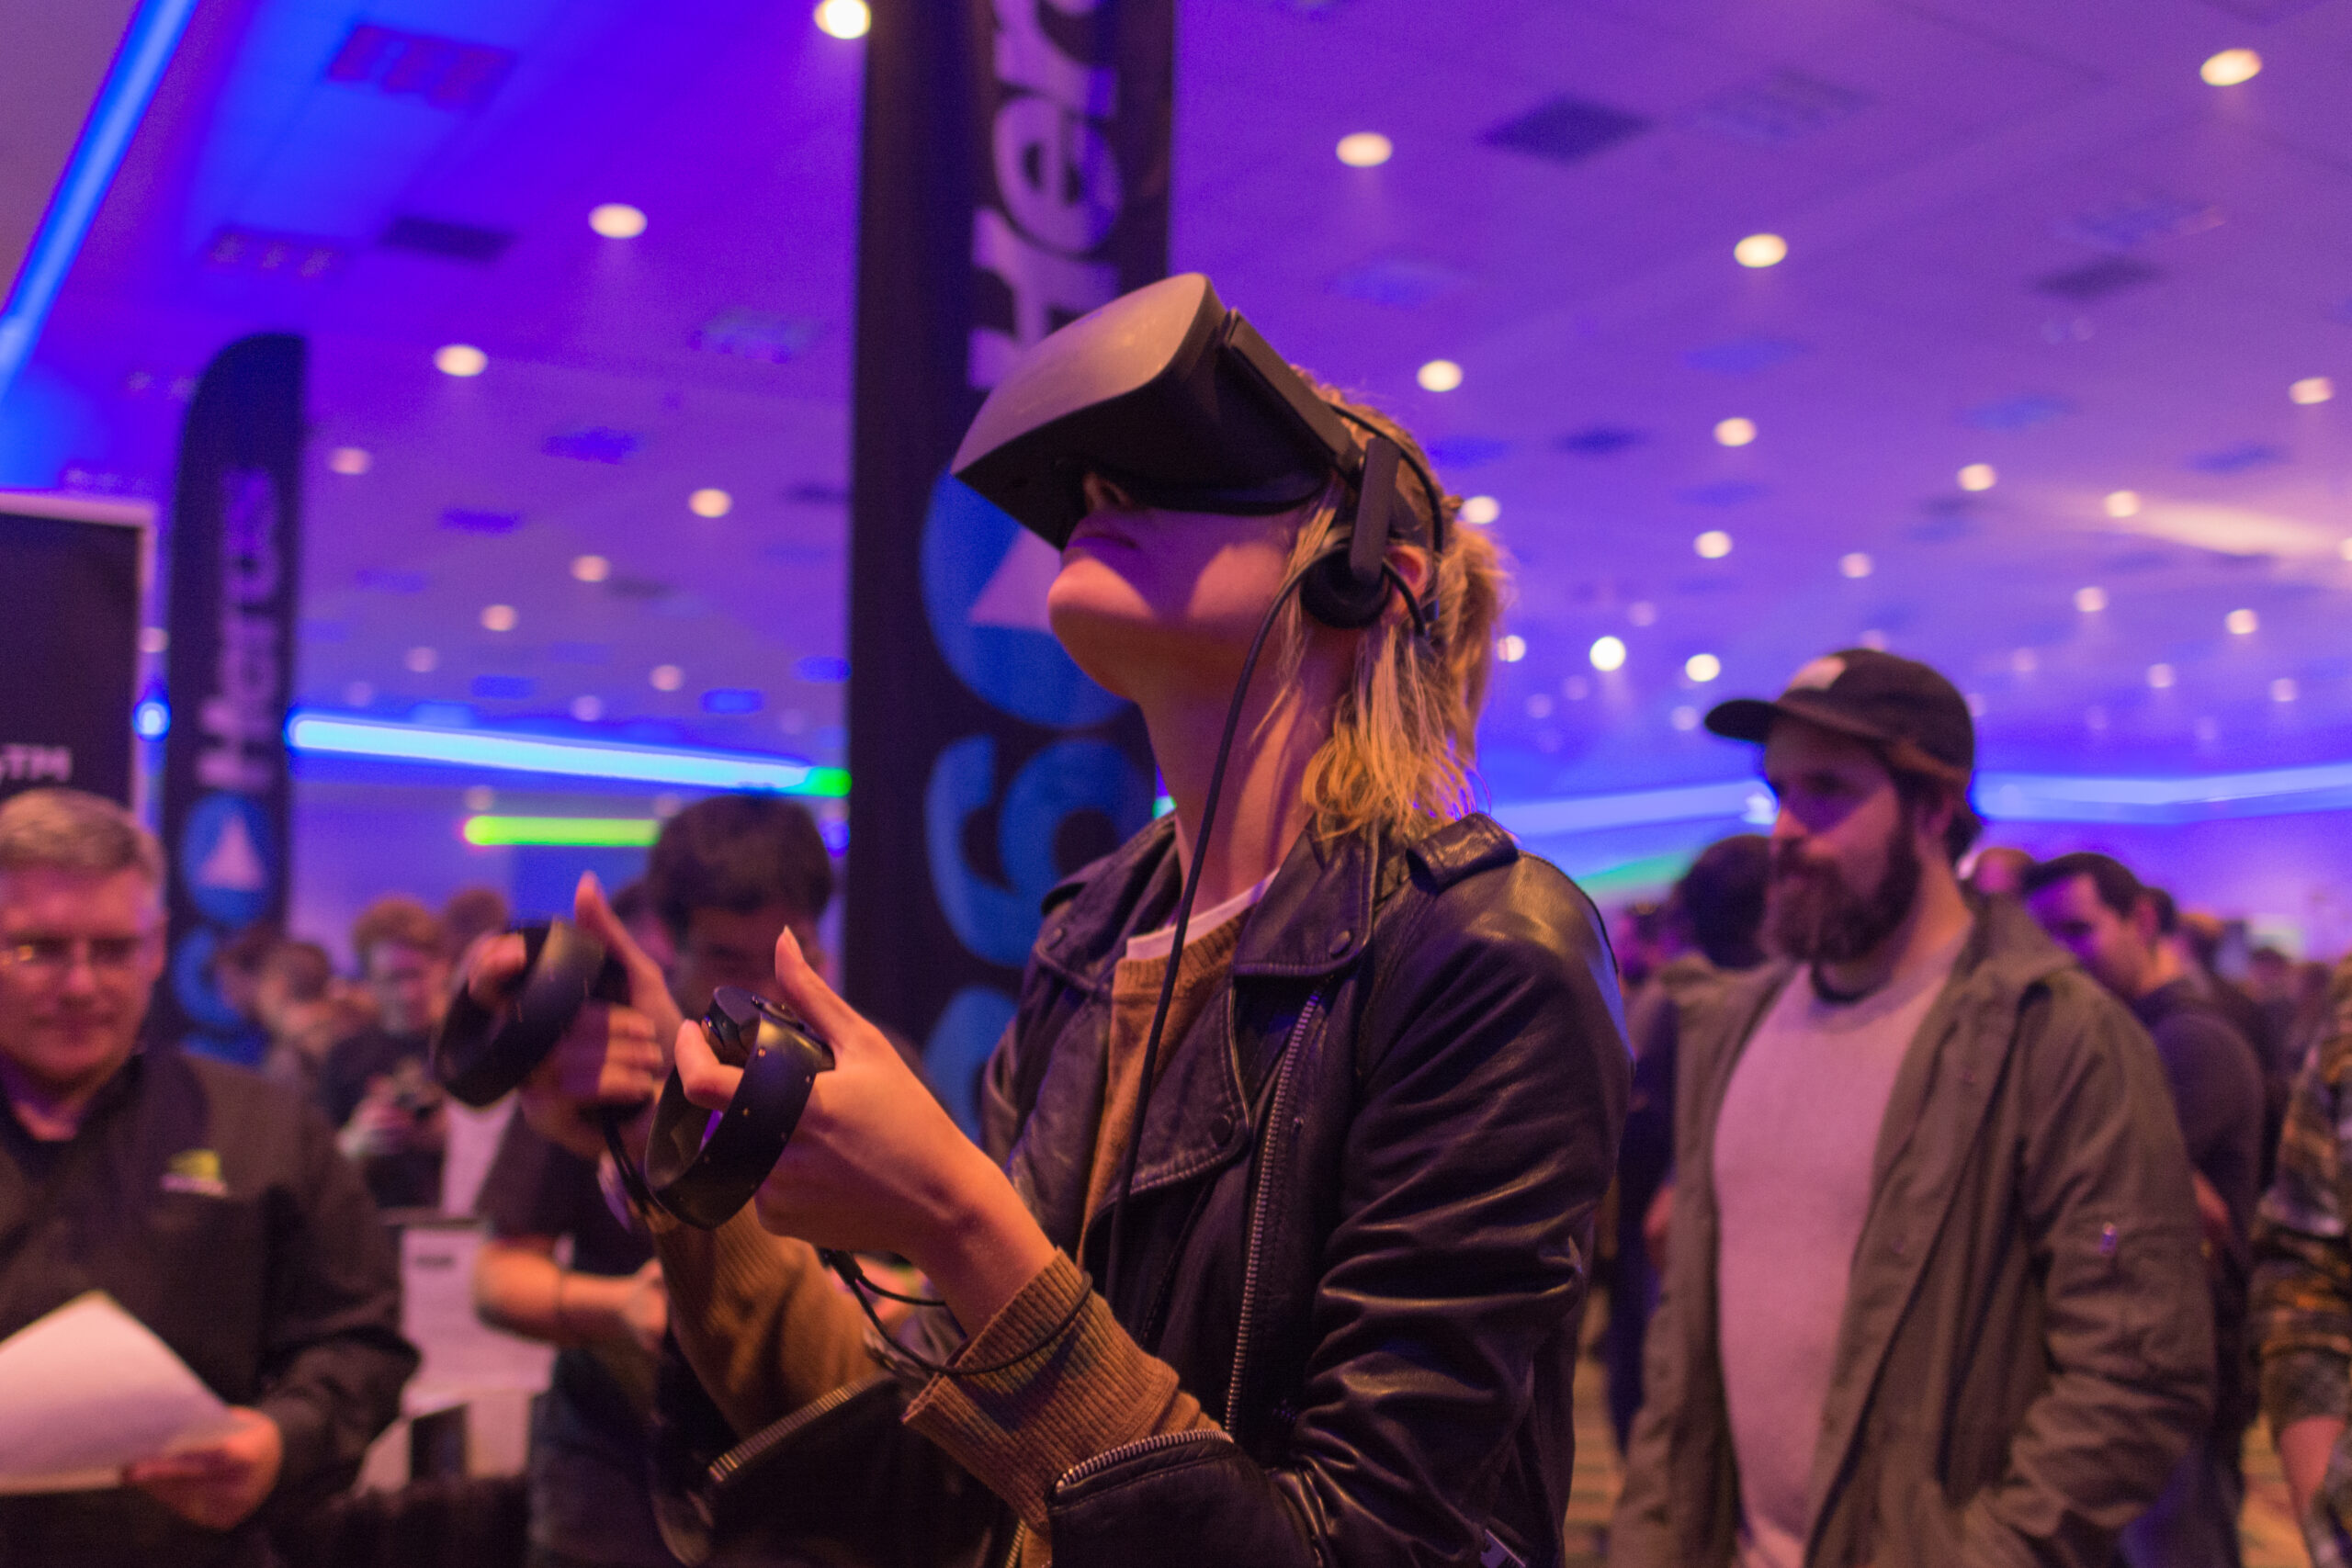 Reality check: Virtual events and the metaverse are not the same